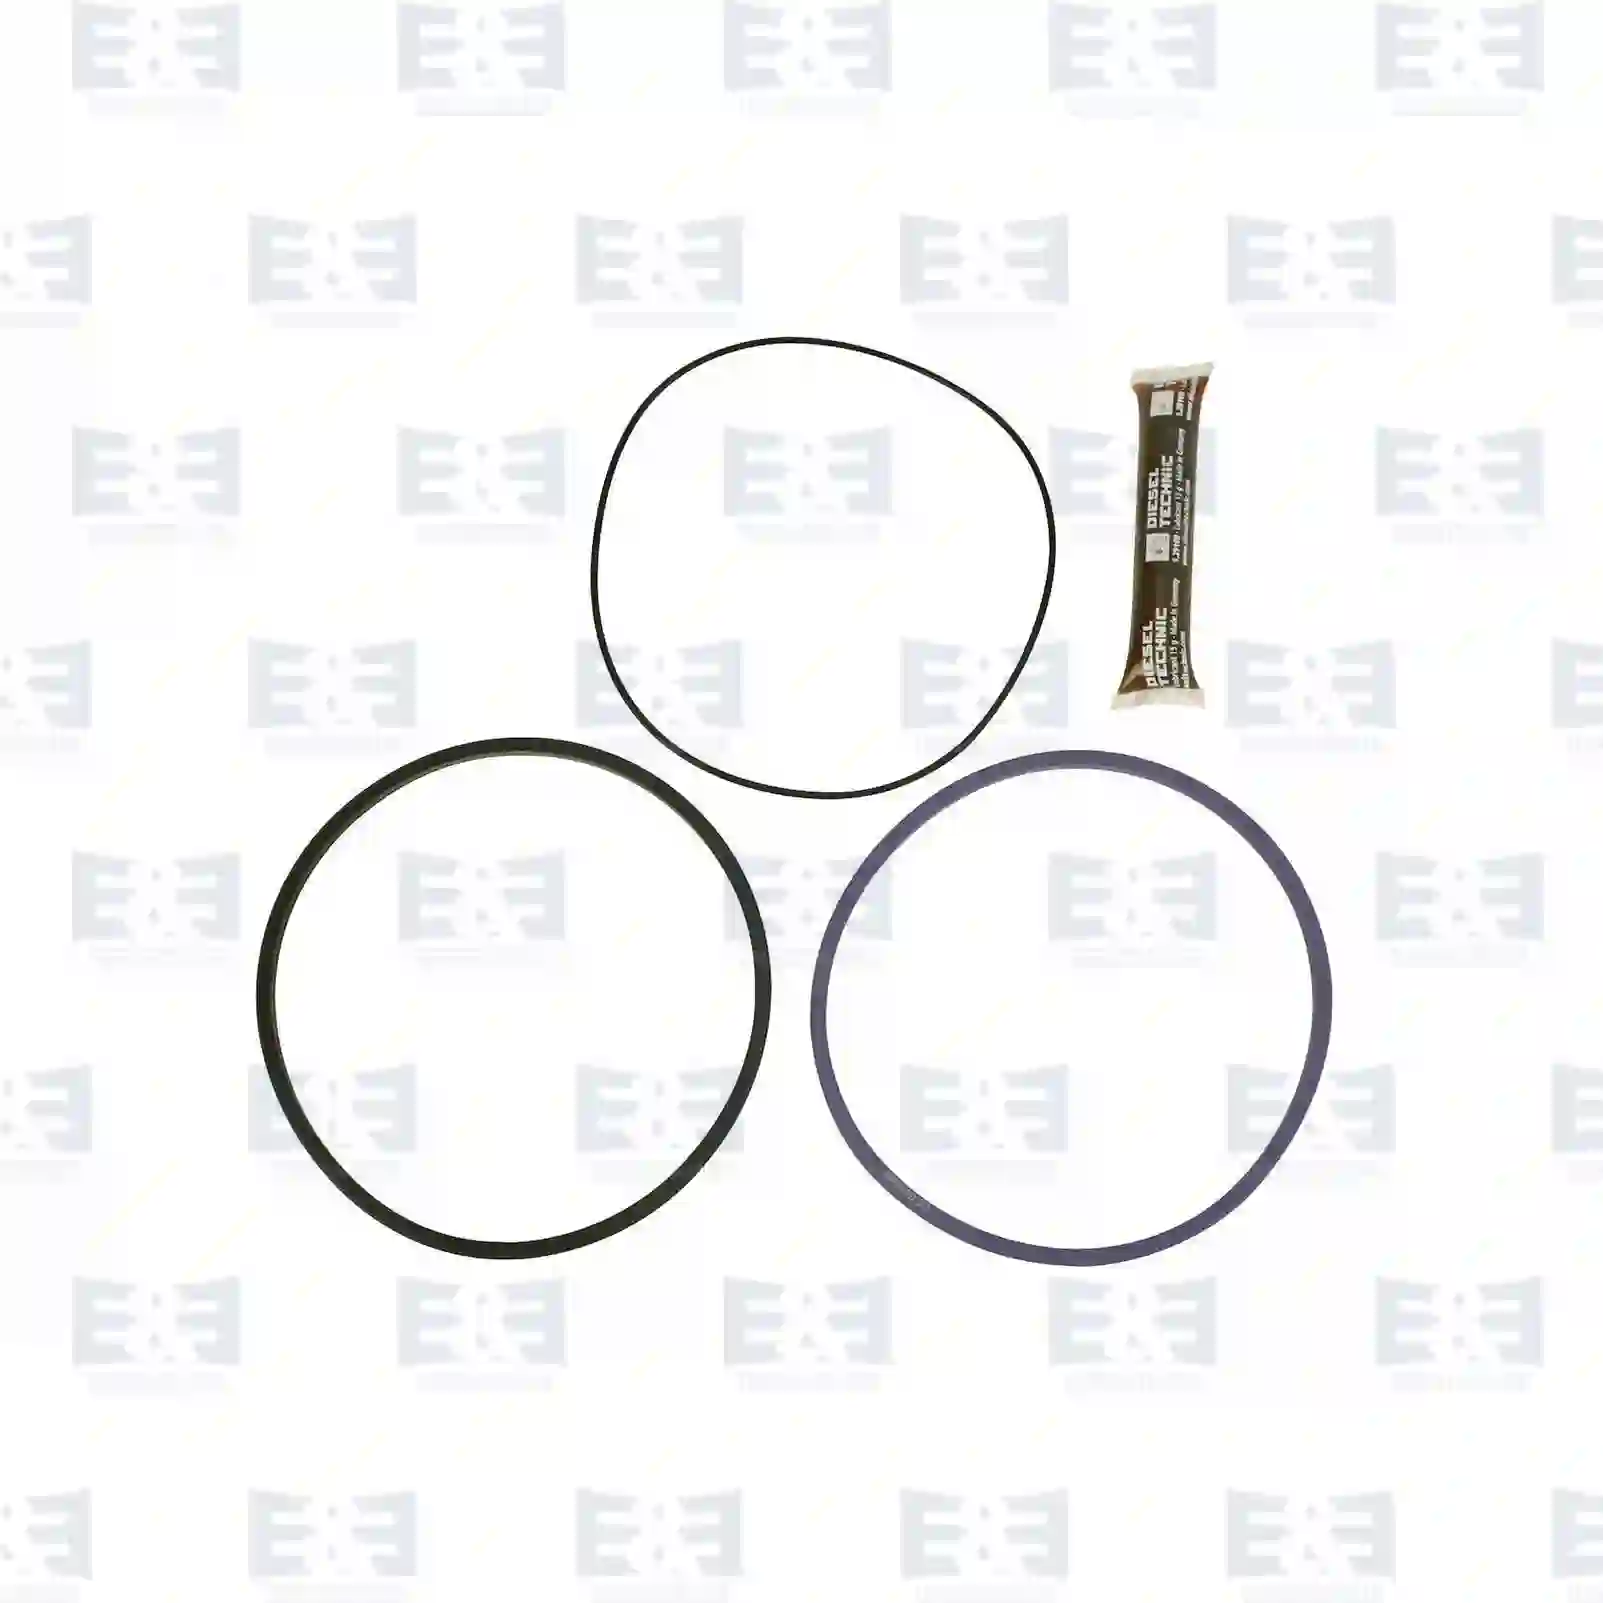 Seal ring kit, cylinder liner, 2E2208755, 7485103699, 85103699, , ||  2E2208755 E&E Truck Spare Parts | Truck Spare Parts, Auotomotive Spare Parts Seal ring kit, cylinder liner, 2E2208755, 7485103699, 85103699, , ||  2E2208755 E&E Truck Spare Parts | Truck Spare Parts, Auotomotive Spare Parts